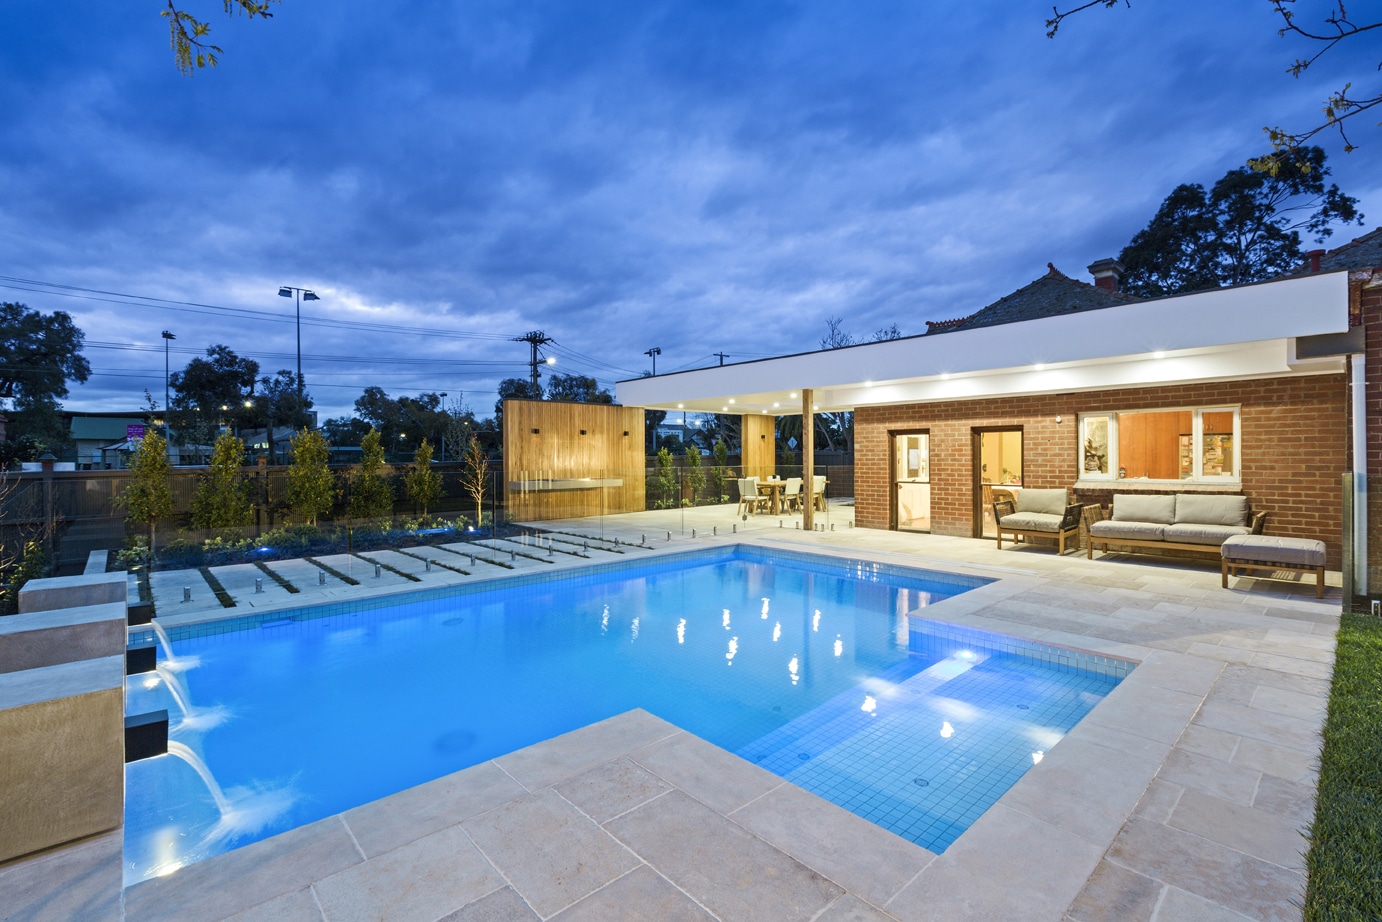 Which is better - a fibreglass or concrete pool?